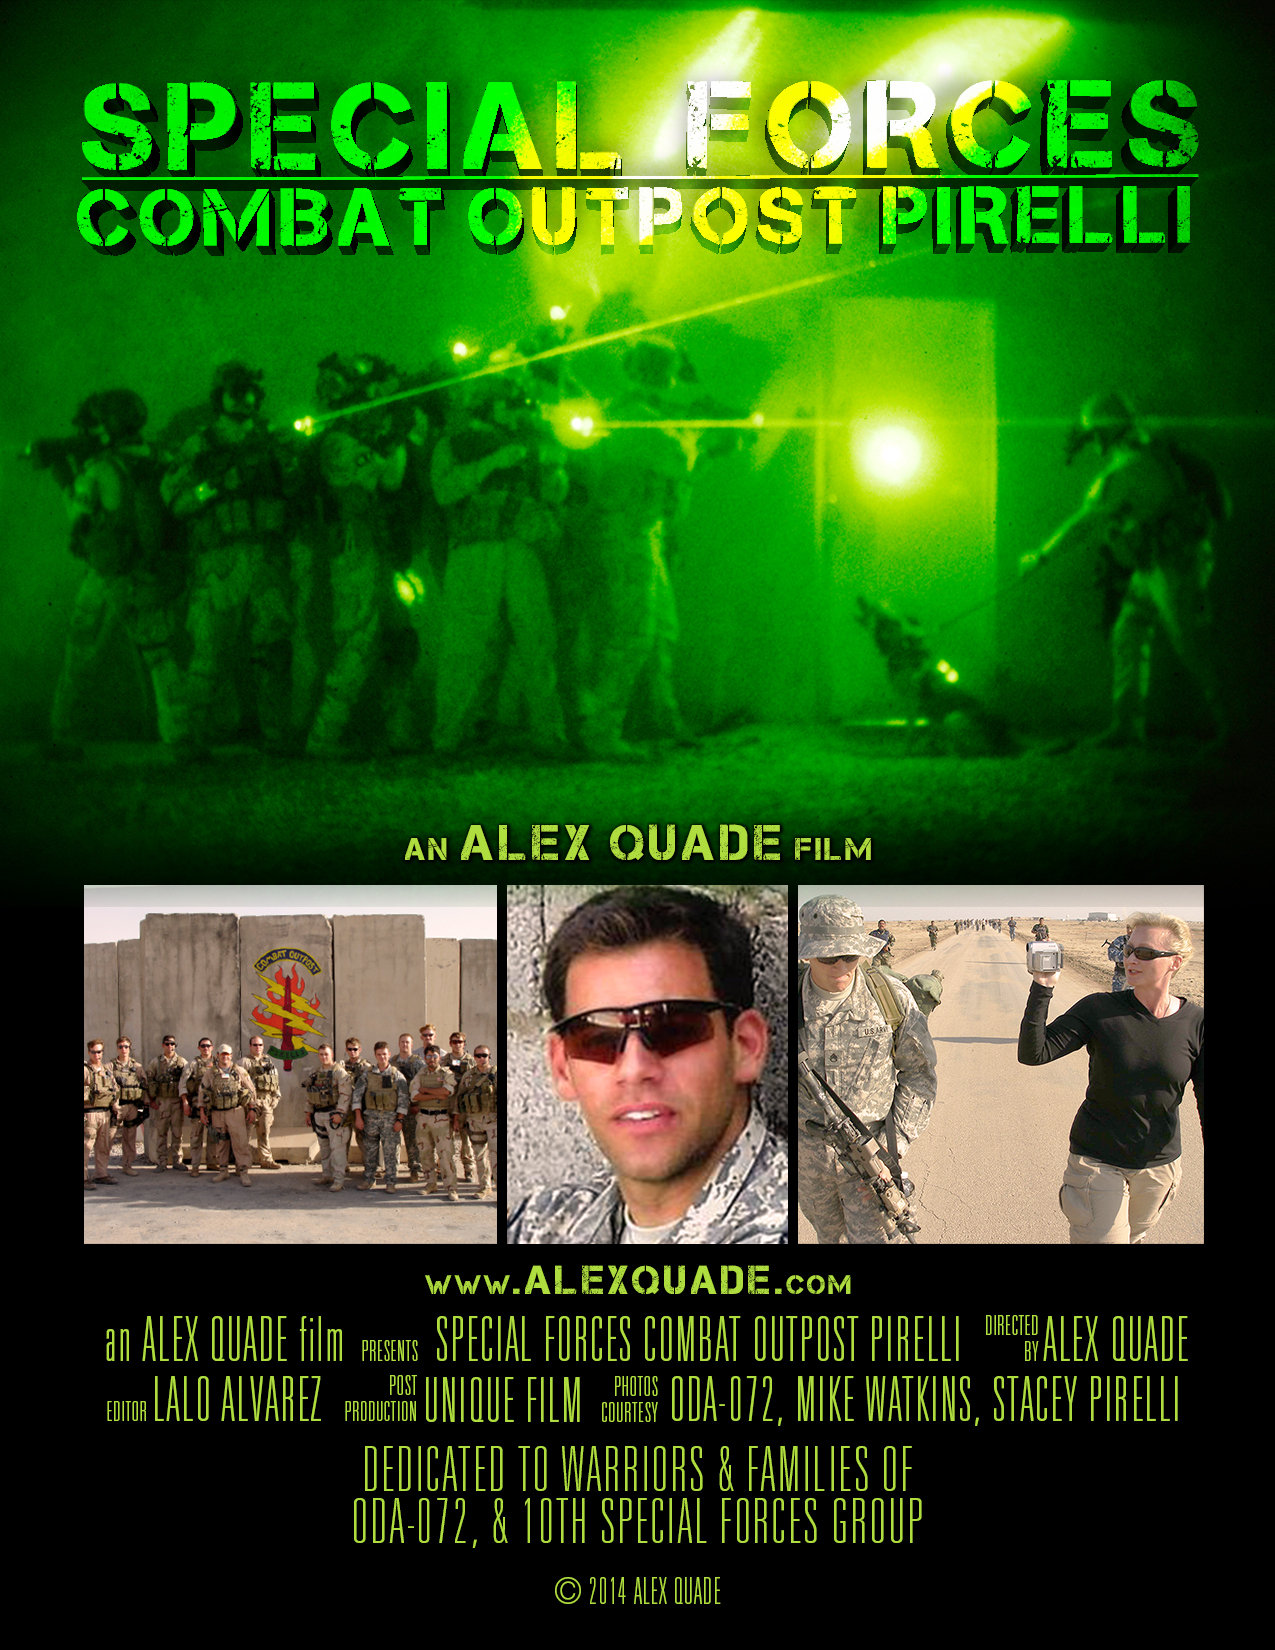 Special Forces Combat Outpost Pirelli